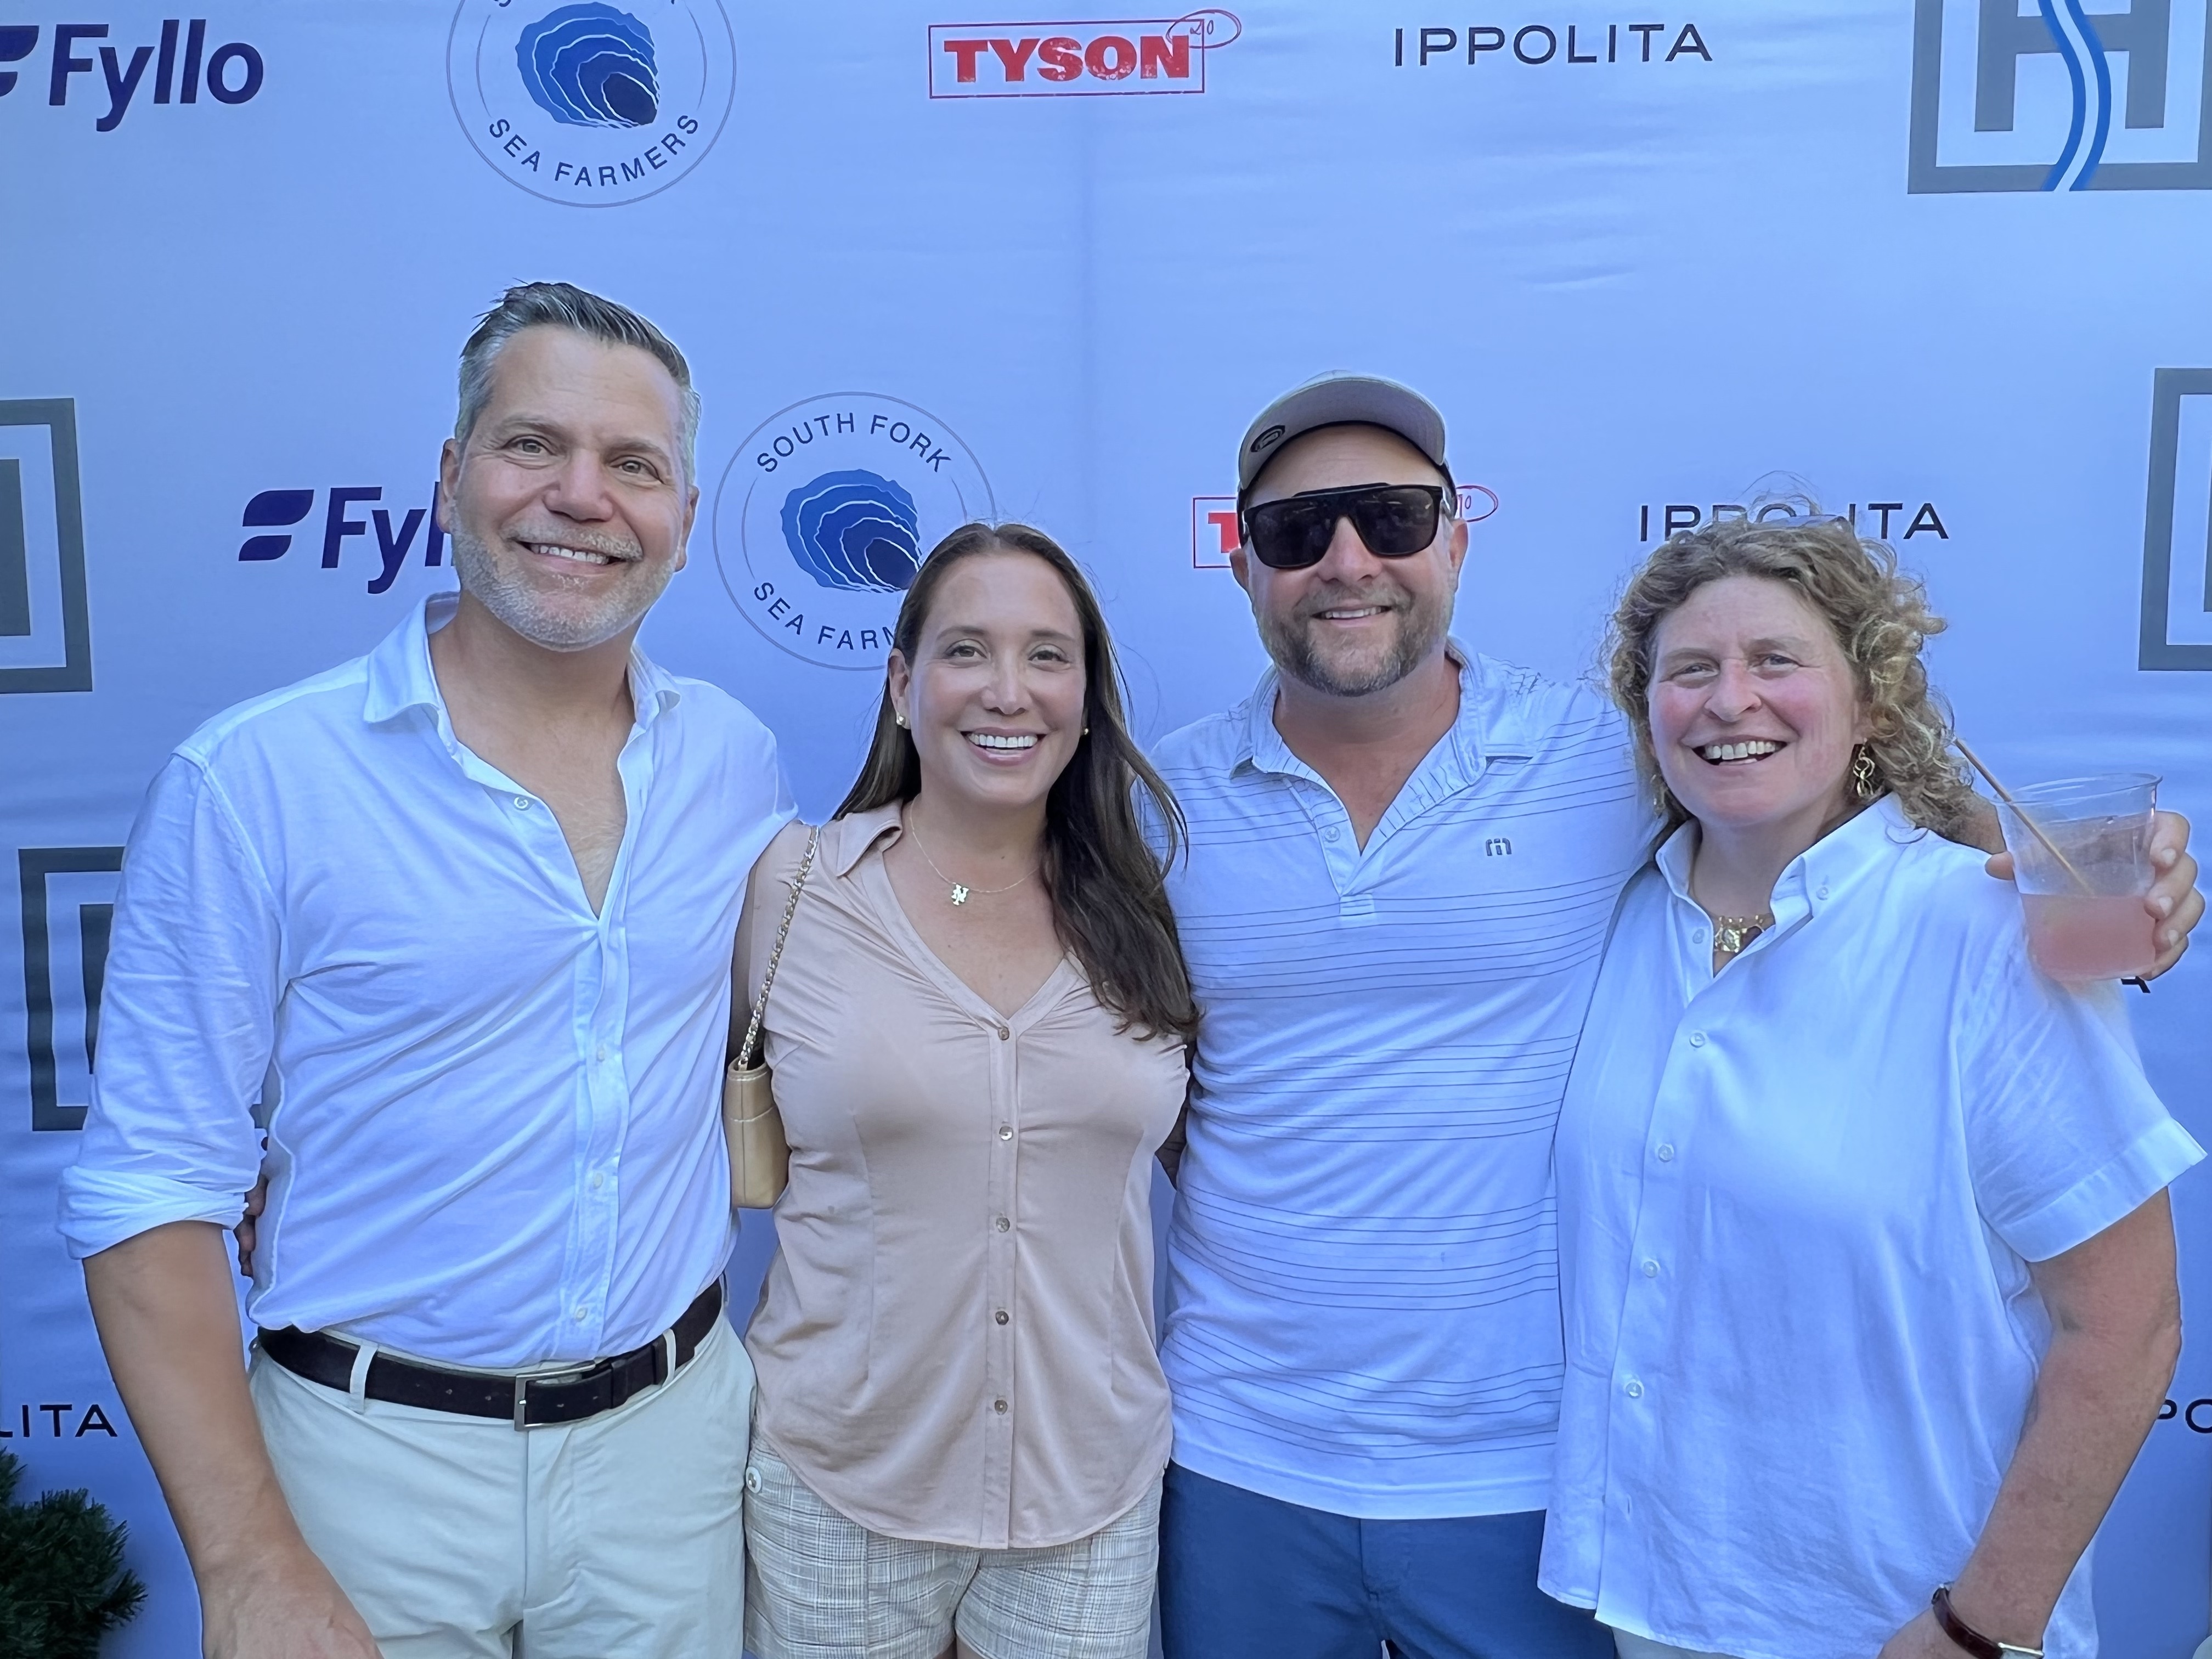 New York Mets owner Alex Cohen, second from left, with Kurt Giehl, left, and South Fork Sea Farmers board members Jeff Ragovin and Alina Lundry.